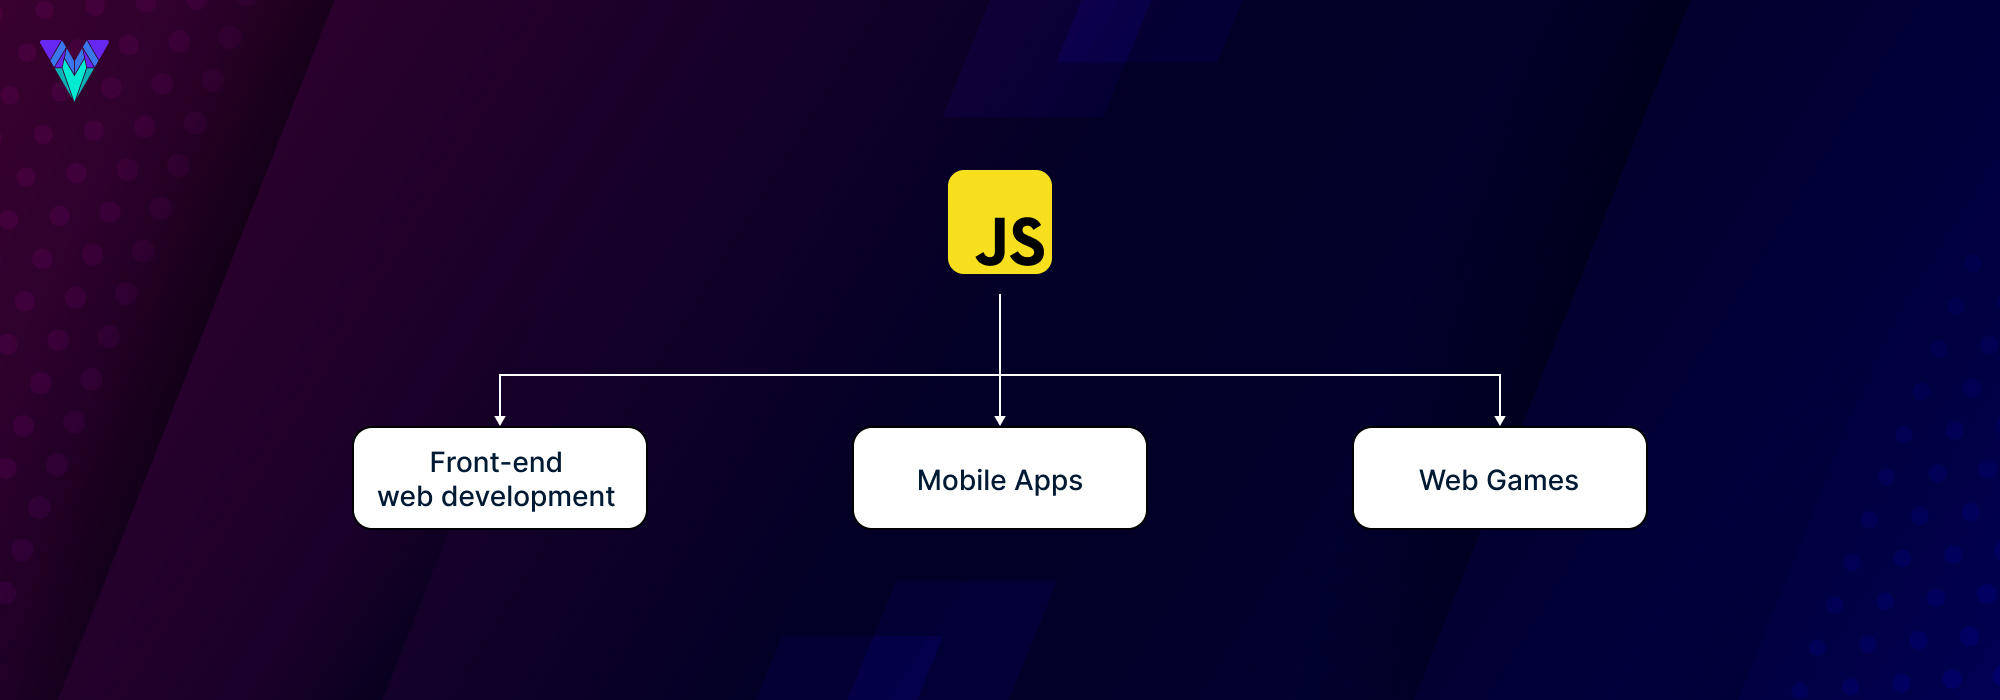 Use Cases For JavaScript